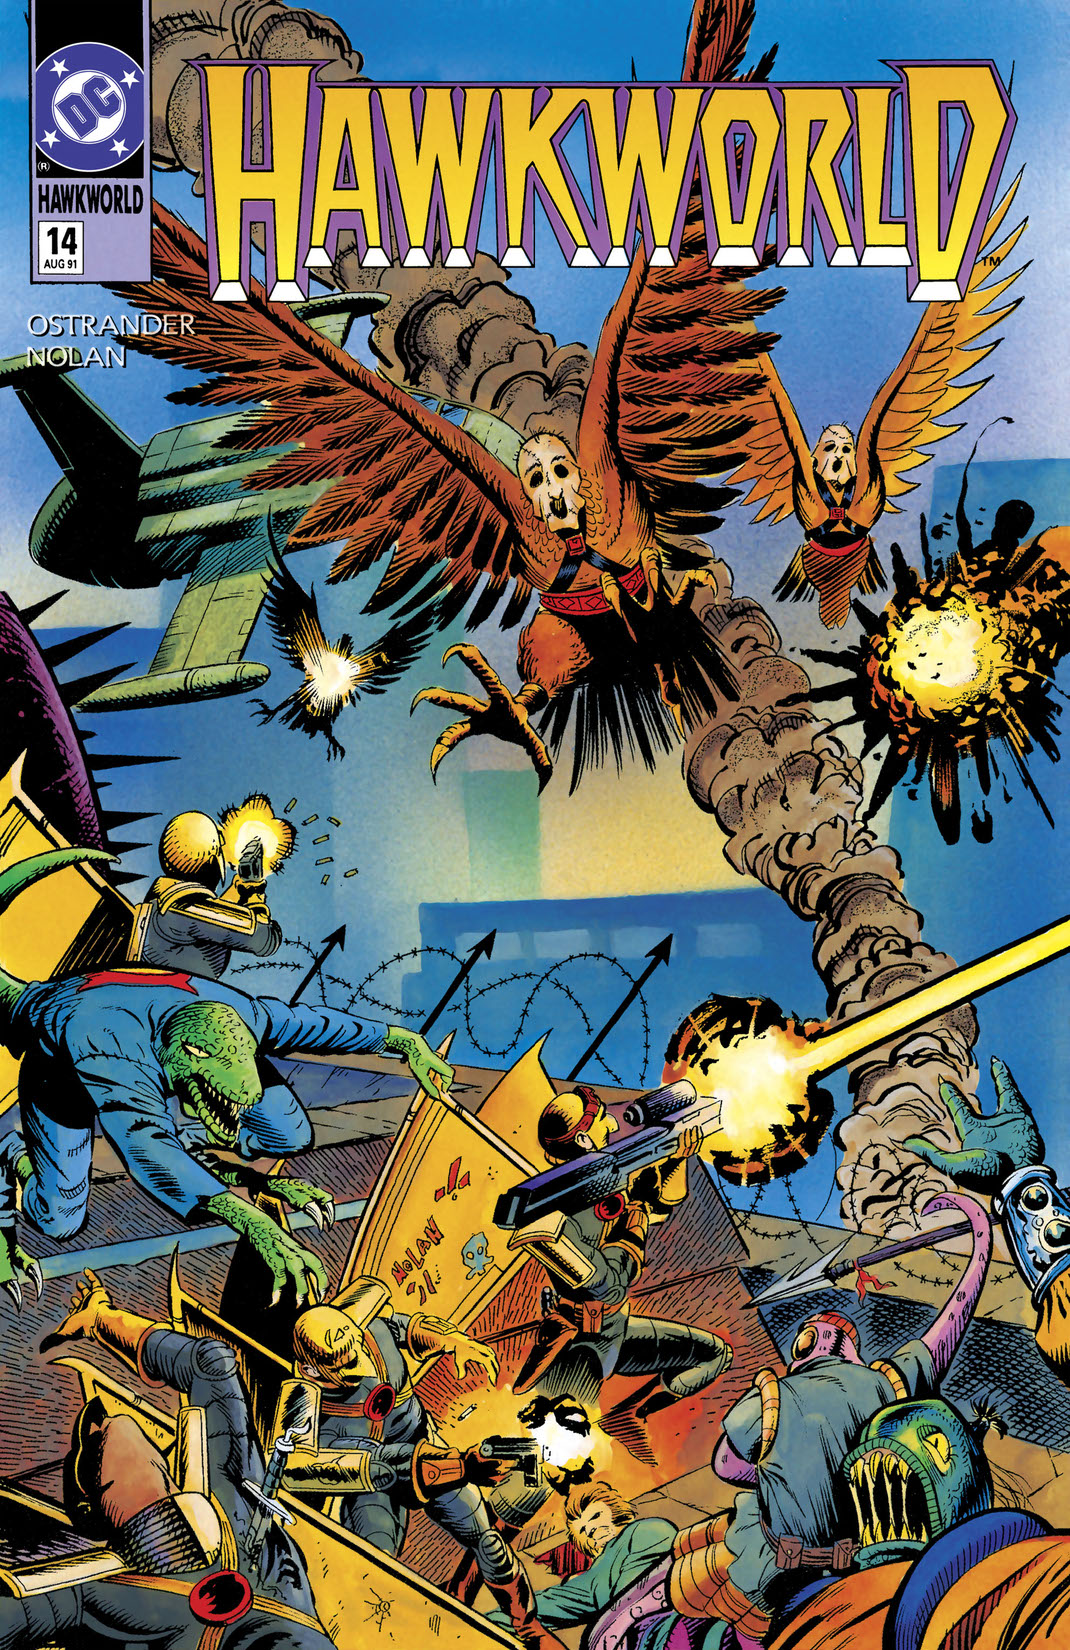 Hawkworld (1989-) #14 preview images